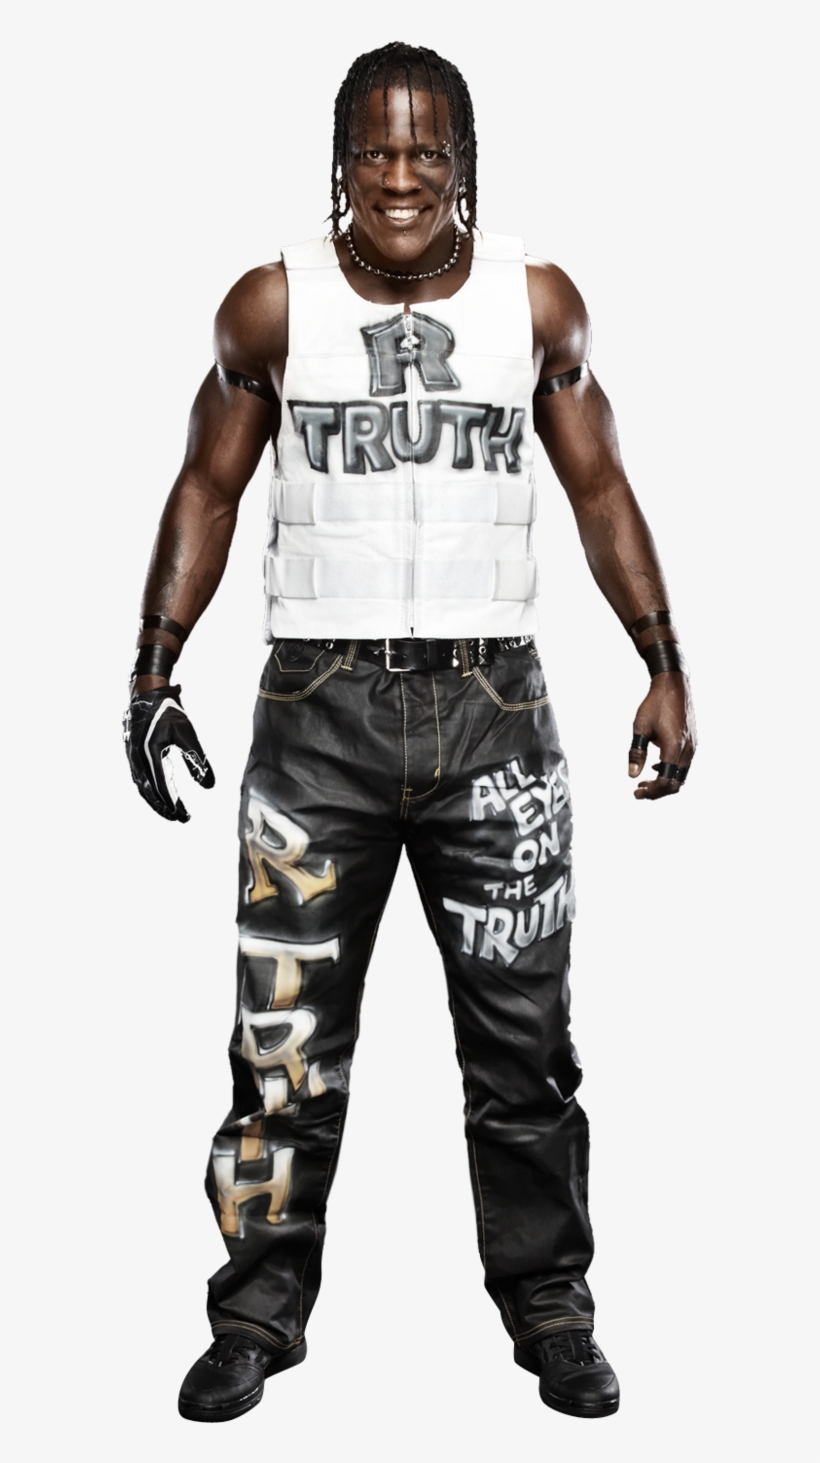 Image result for r-truth 2012"